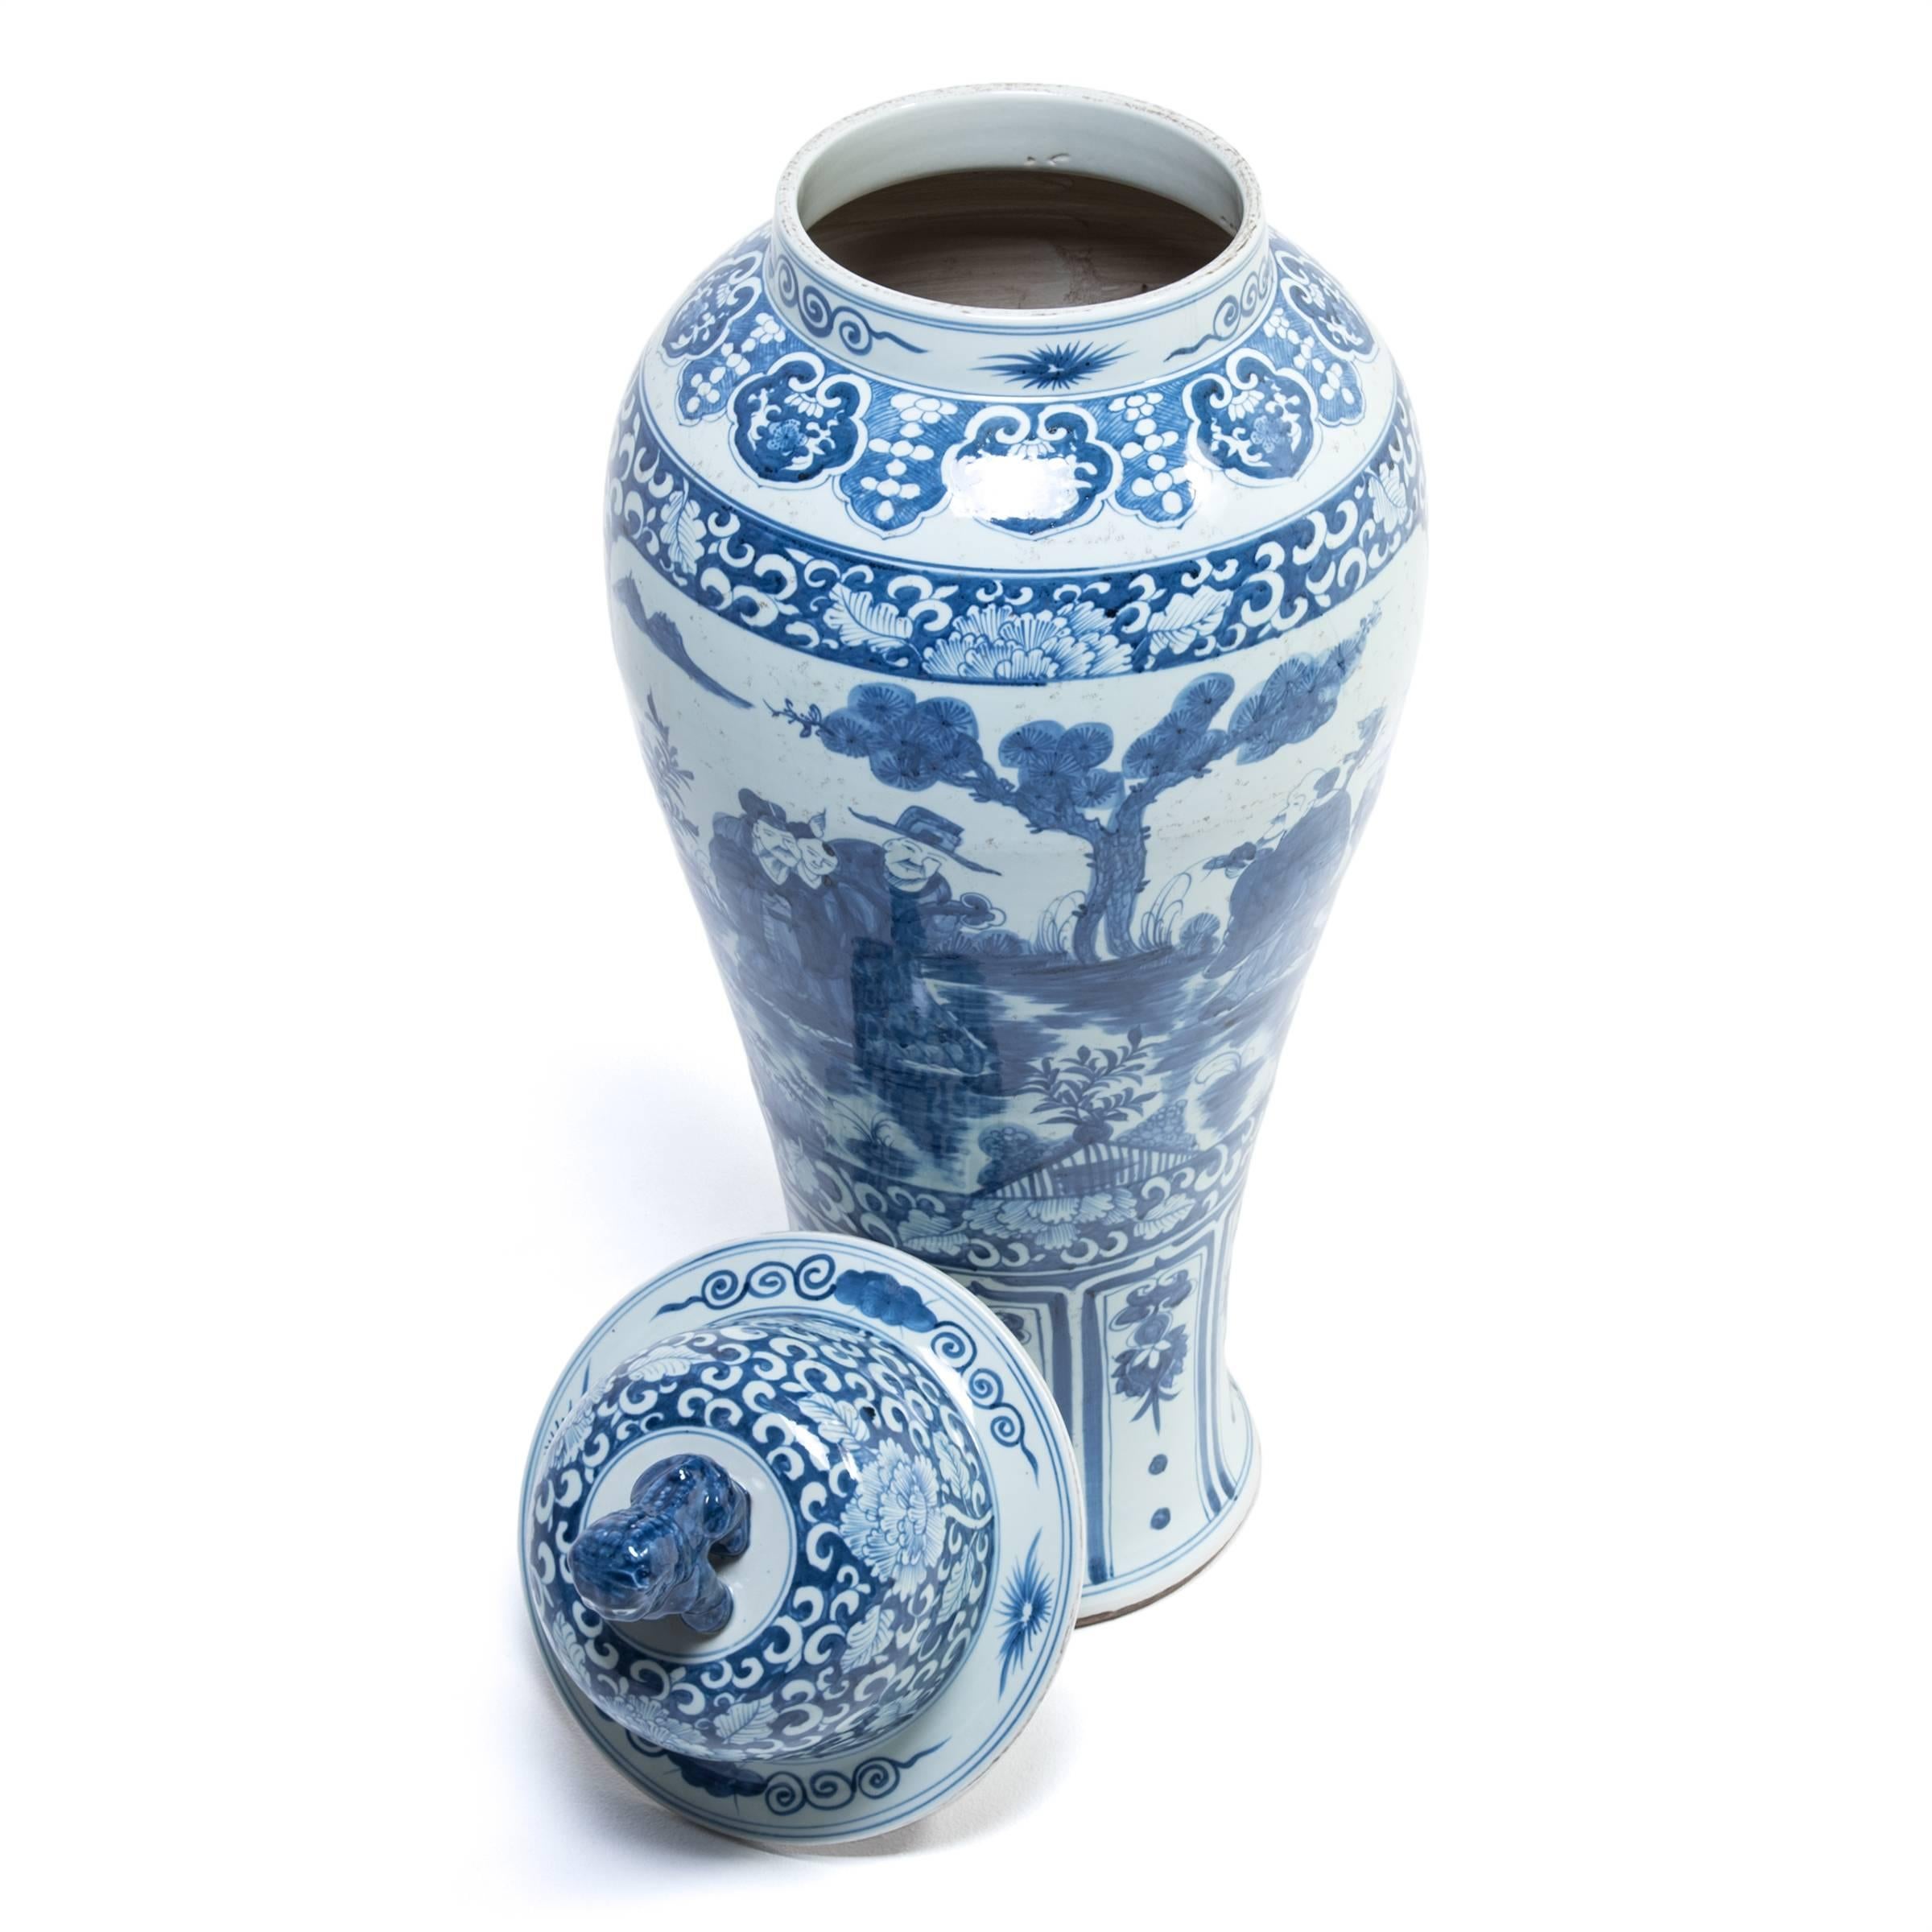 Ceramic Chinese Blue and White Ginger Jar with Shizi and Landscape Portraits